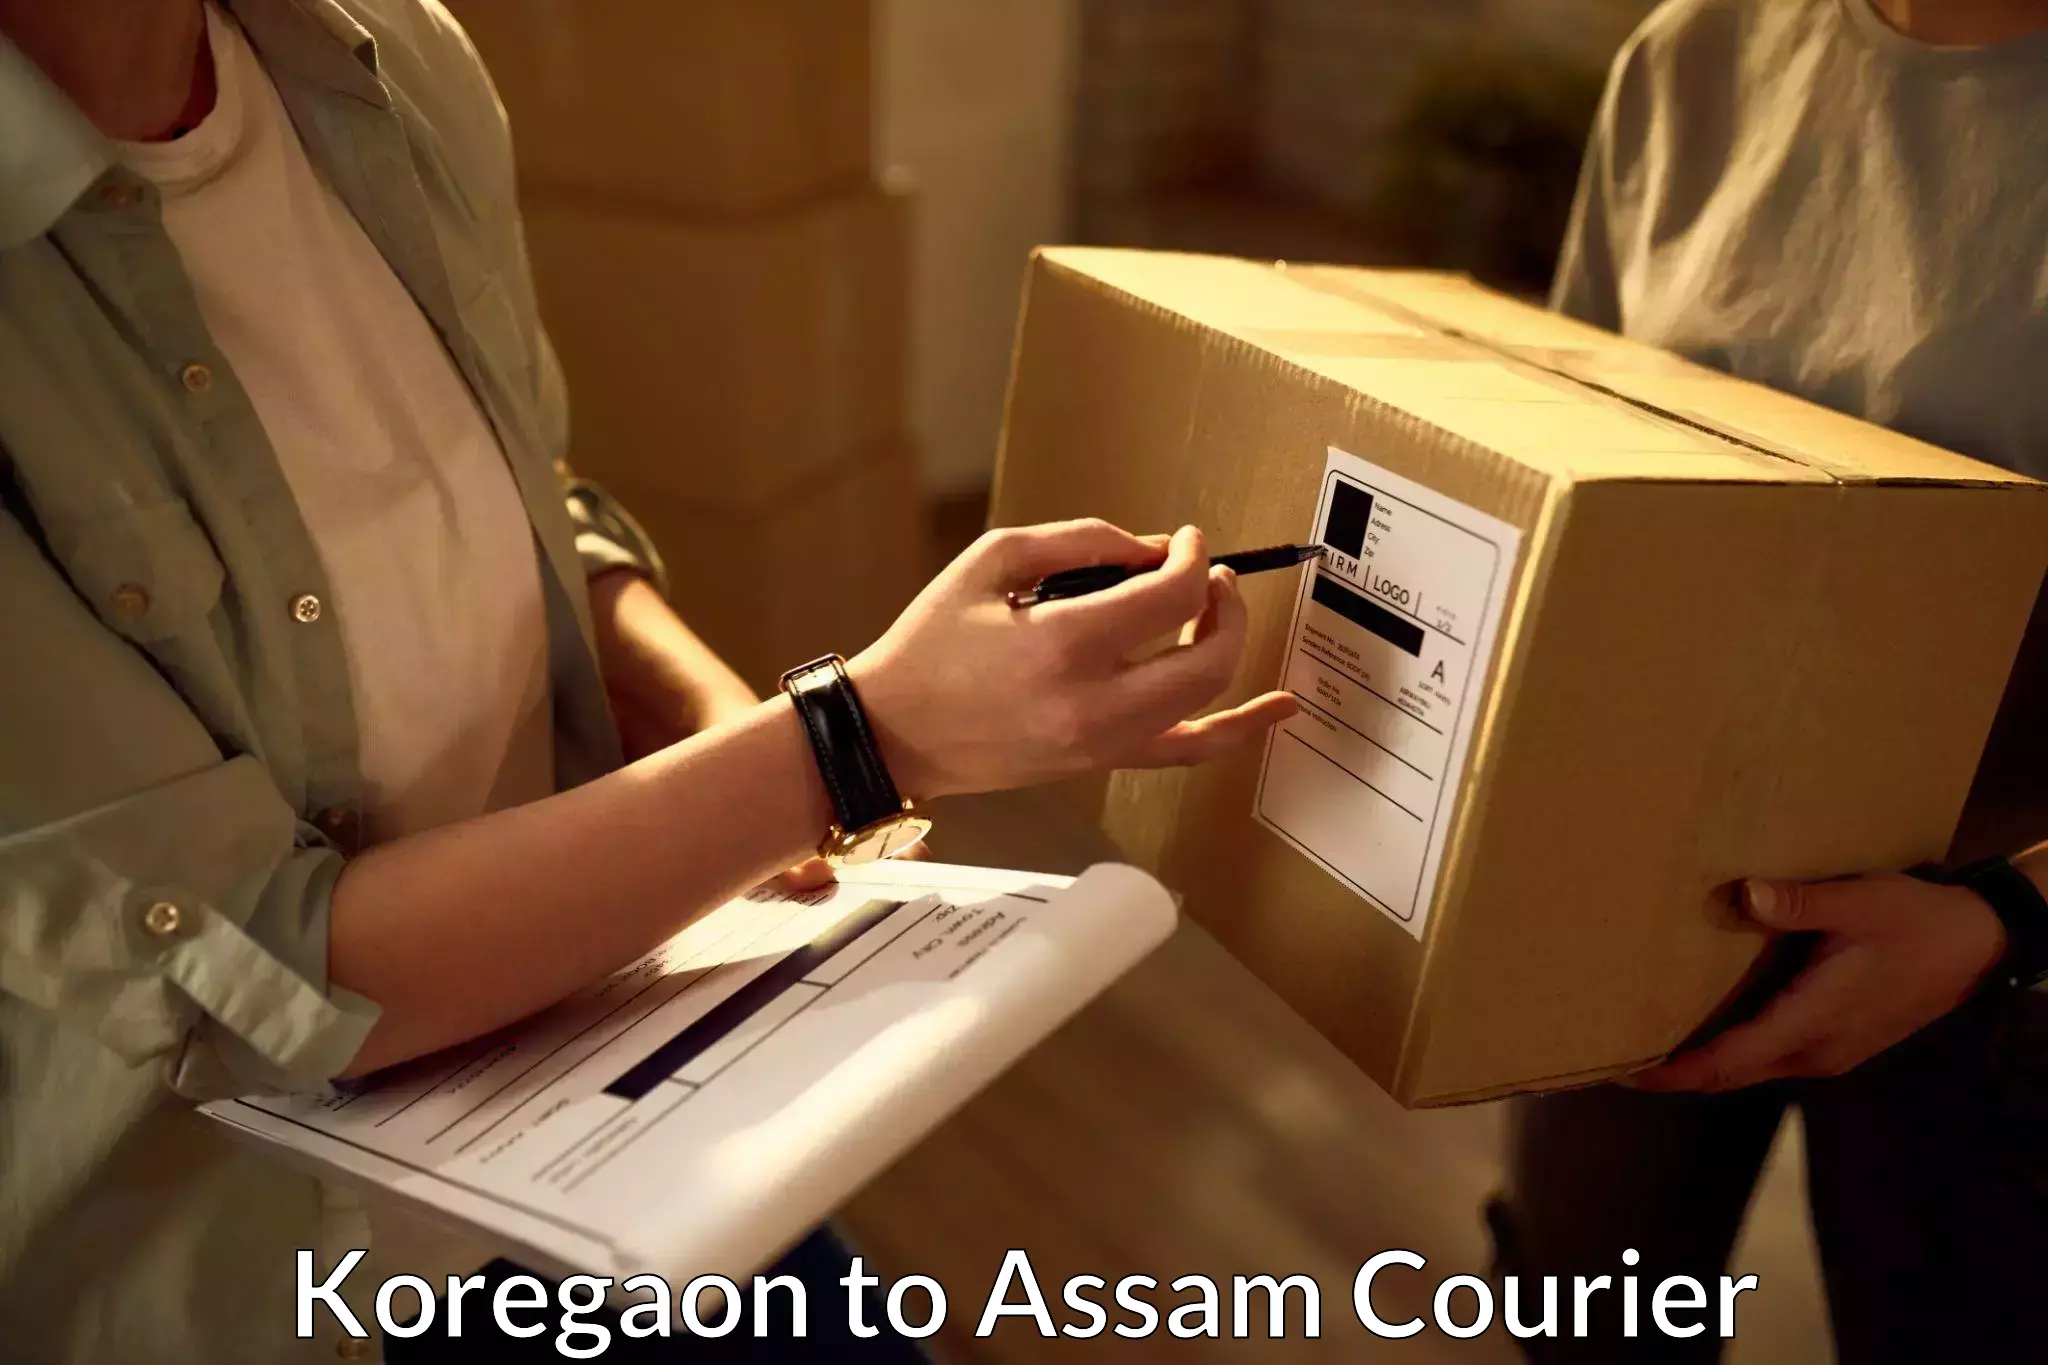 On-call courier service Koregaon to Lala Assam